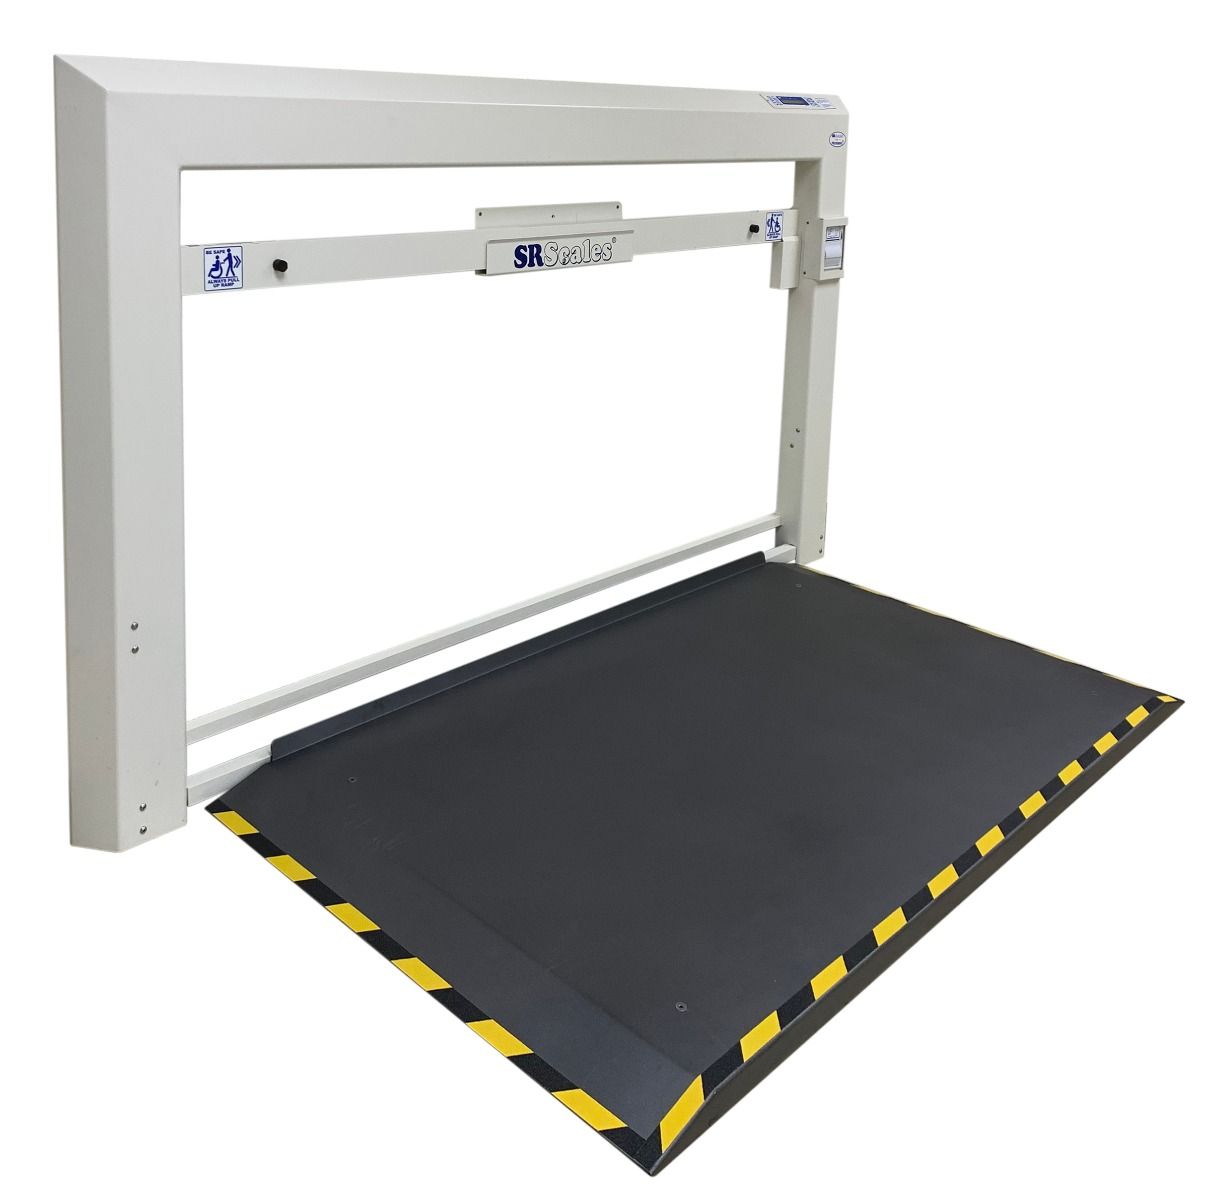 https://media.cmecorp.com/catalog/product/cache/5cb210a3a6c58f3682339fdba05c5652/s/r/sr_scales_sr7020i_extra_large_hosptial_stretcher_wall_mount_scale.jpg